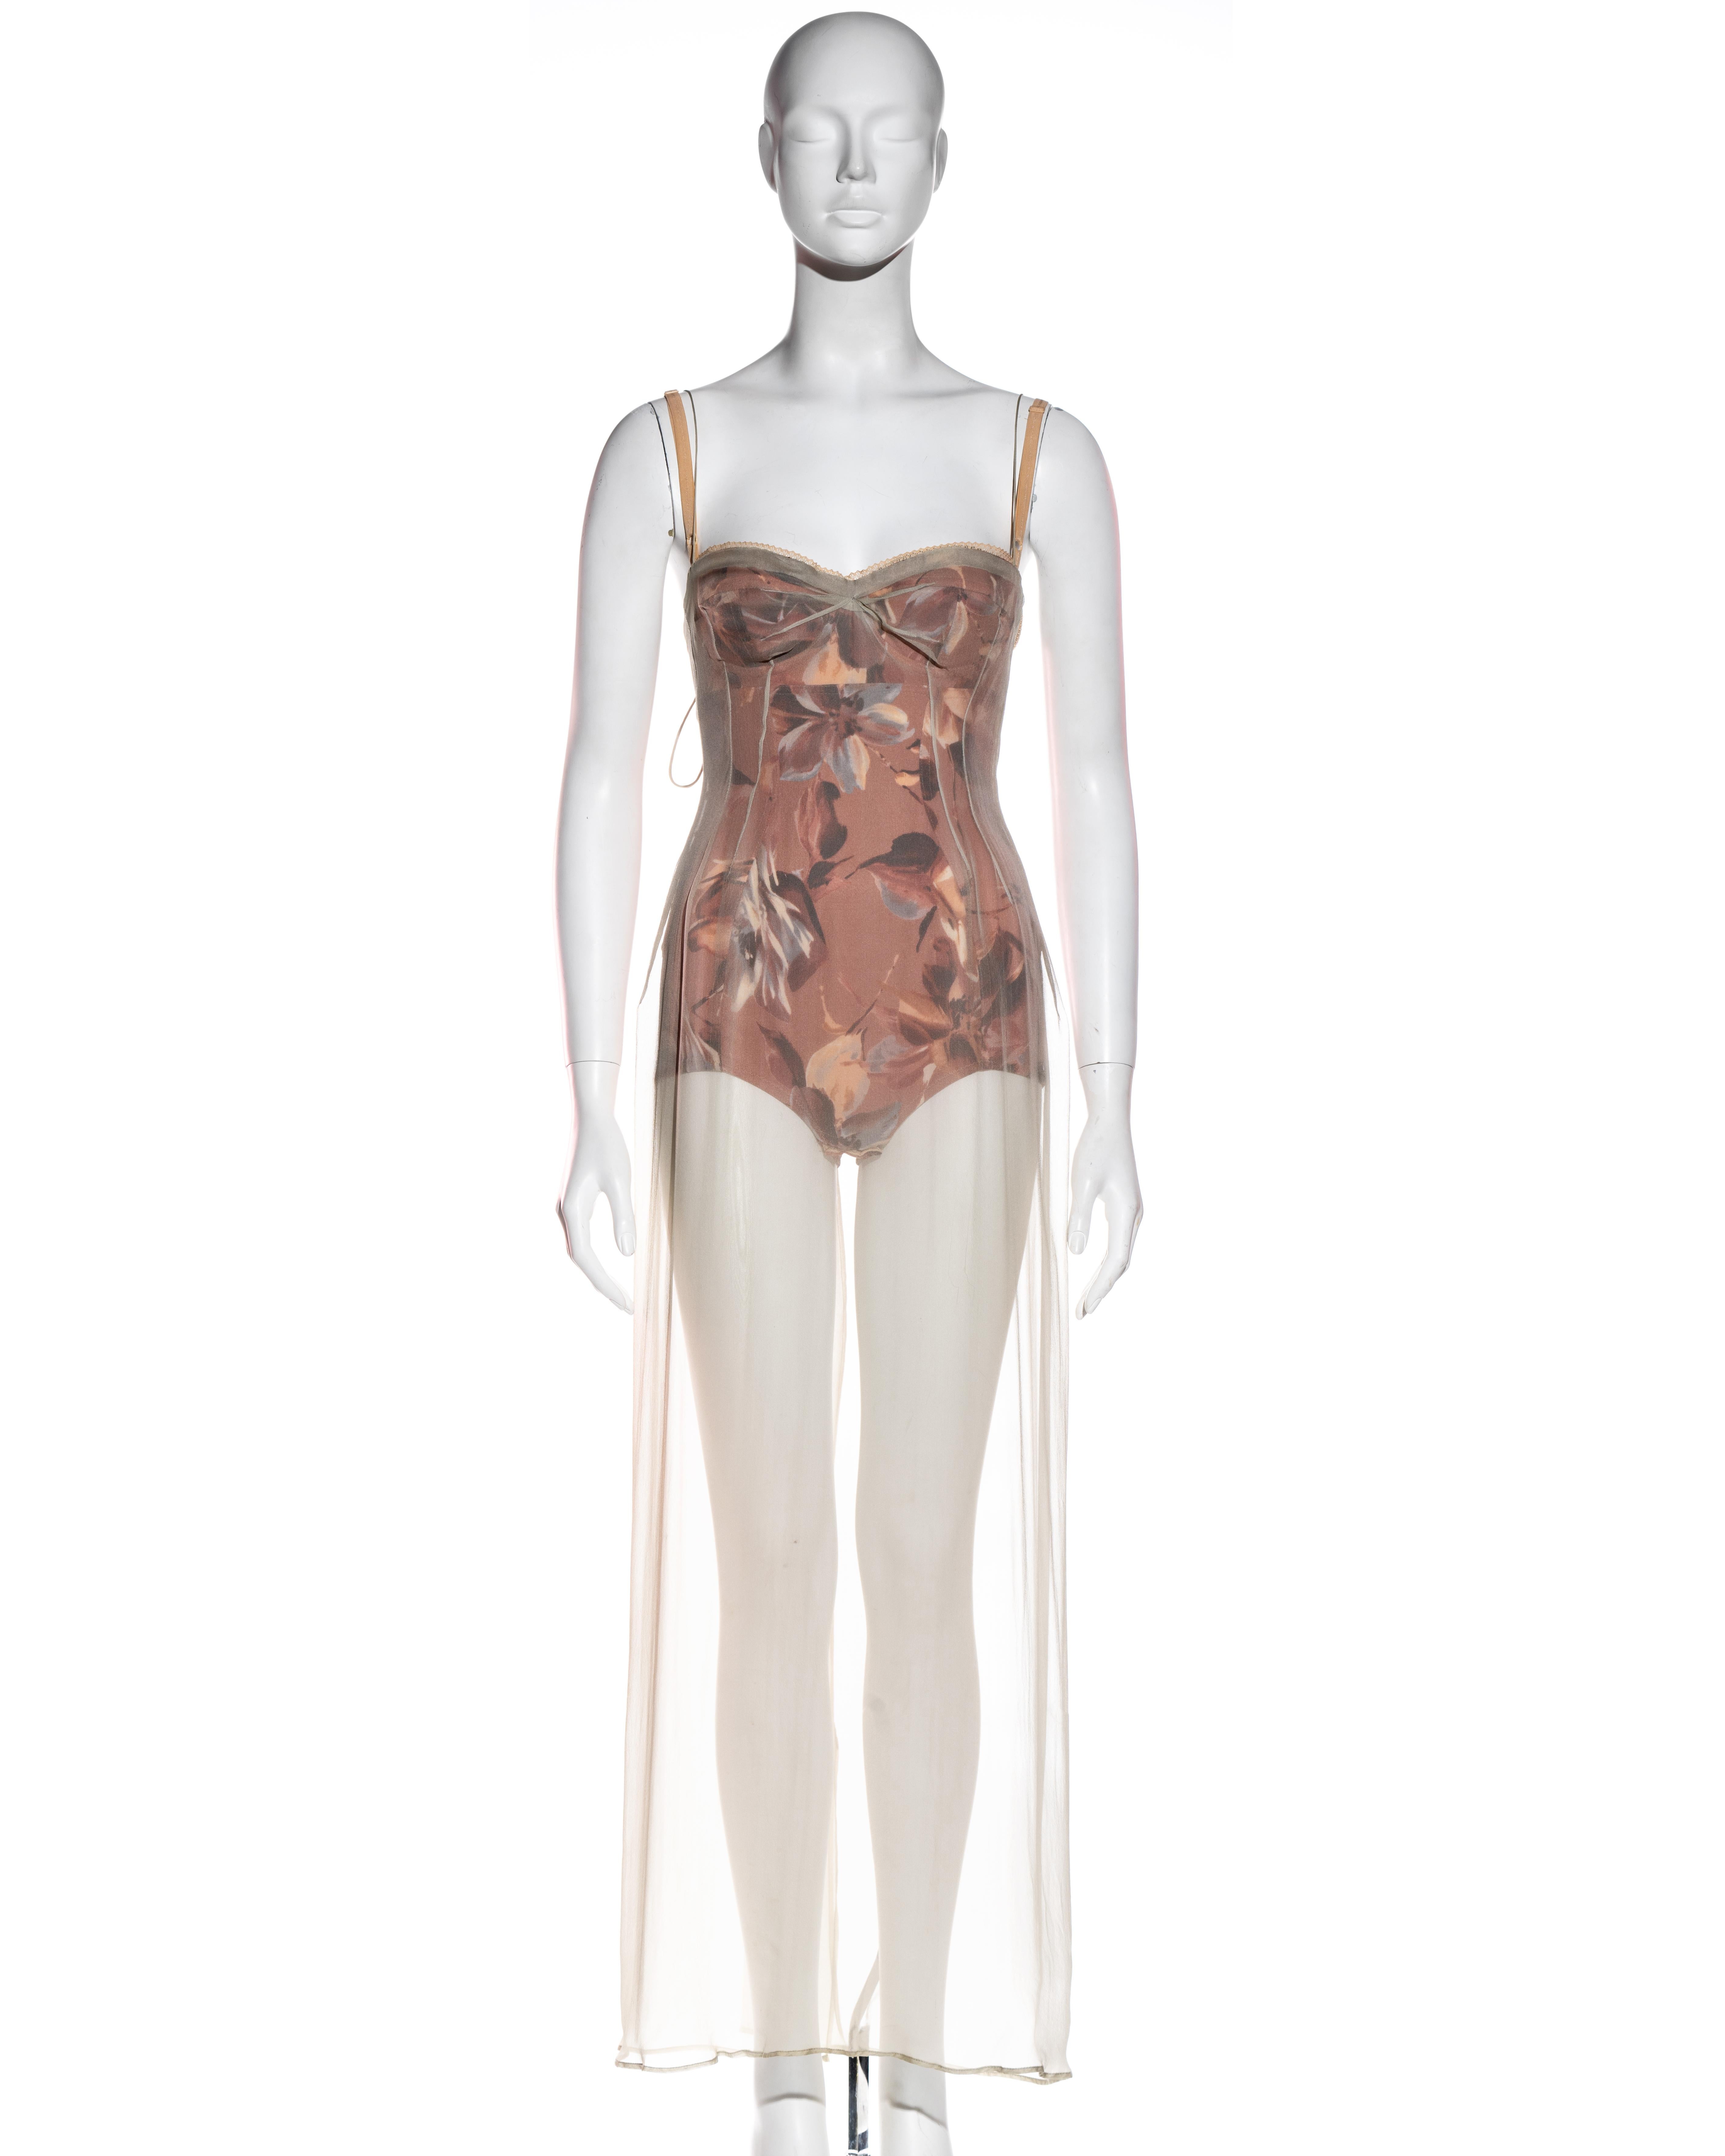 ▪ Dolce & Gabbana silk evening dress 
▪ Pale silk chiffon maxi dress 
▪ Beneath, a pink floral printed corseted bodysuit with metal hook closures 
▪ Delicate seaming and tucking on the bodice 
▪ Snap buttons and string bow fastening at back 
▪